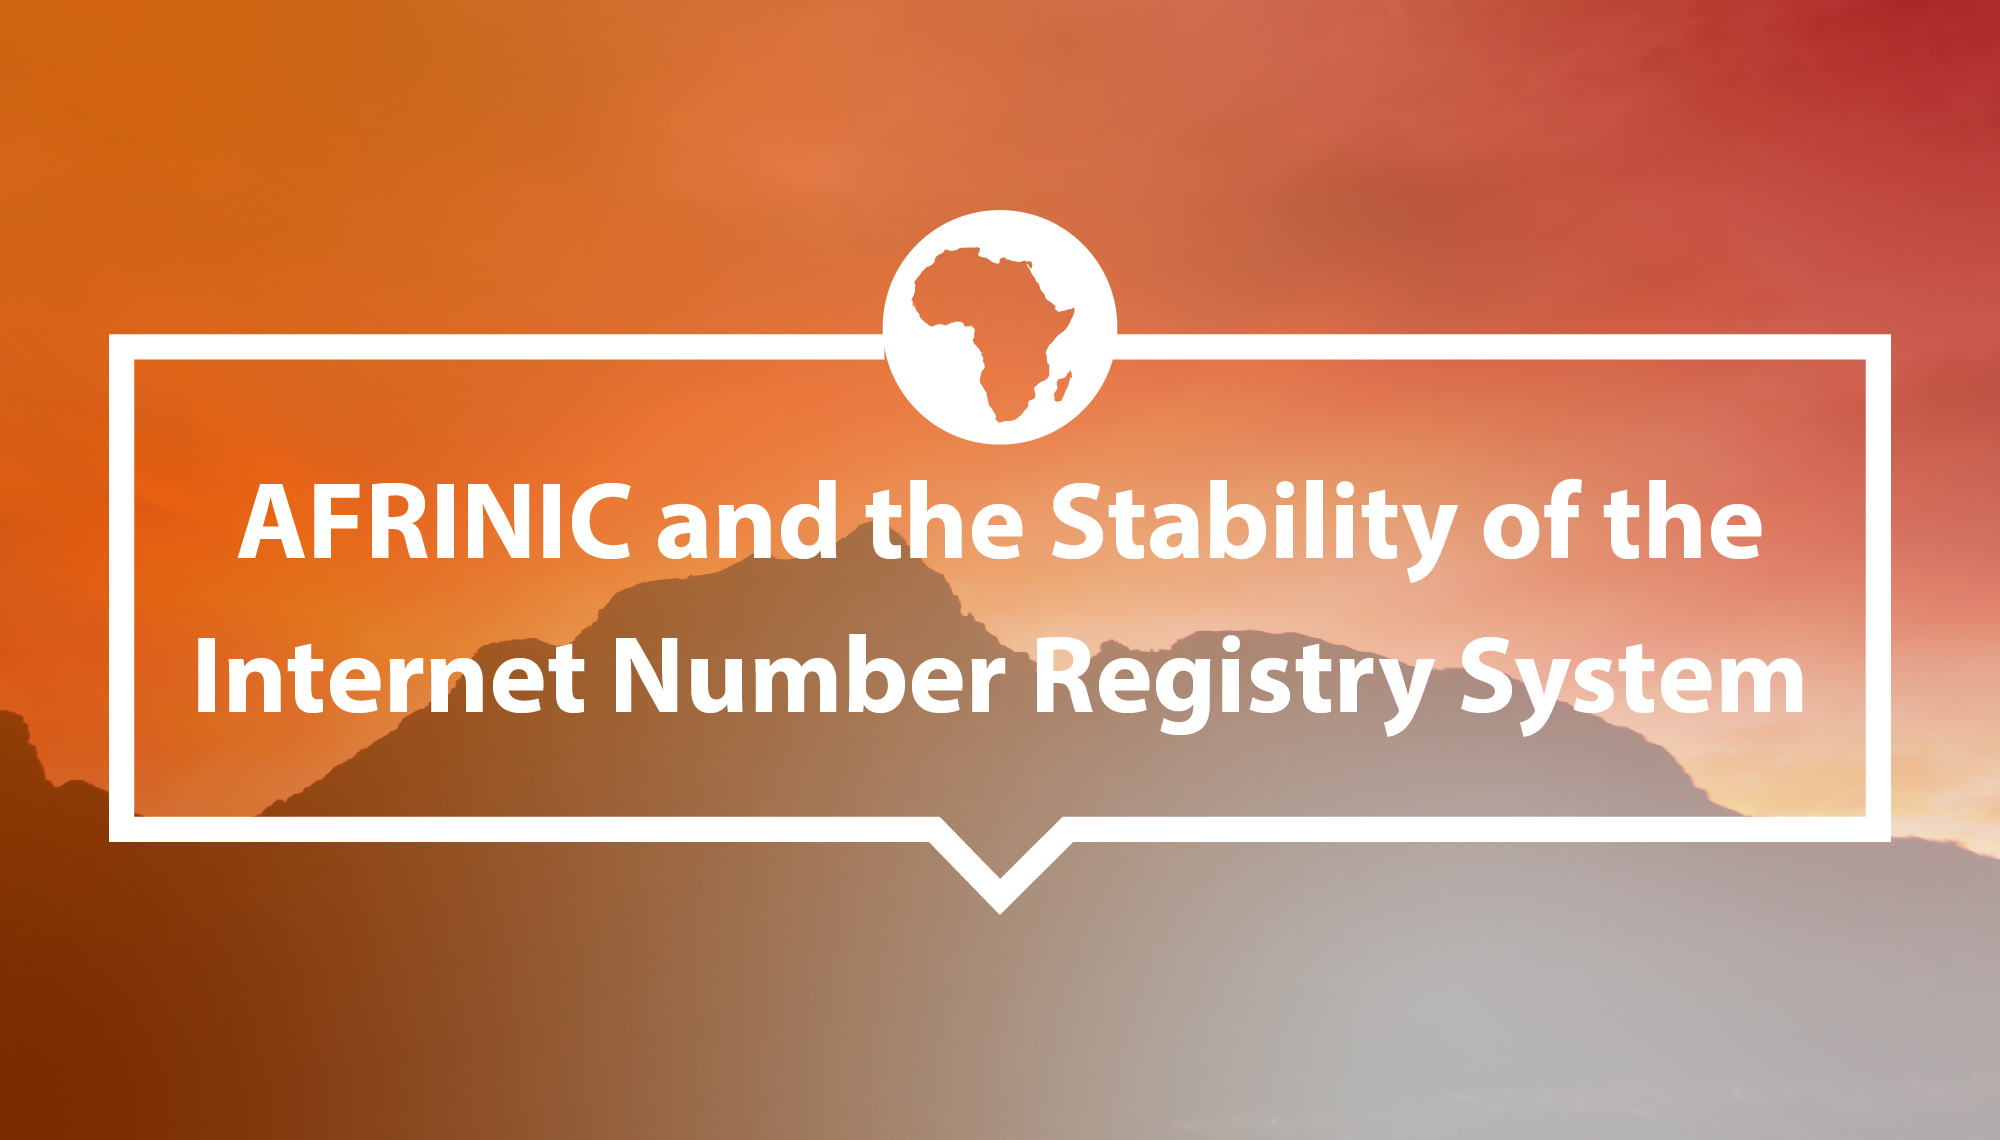 AFRINIC and the Stability of the Internet Number Registry System